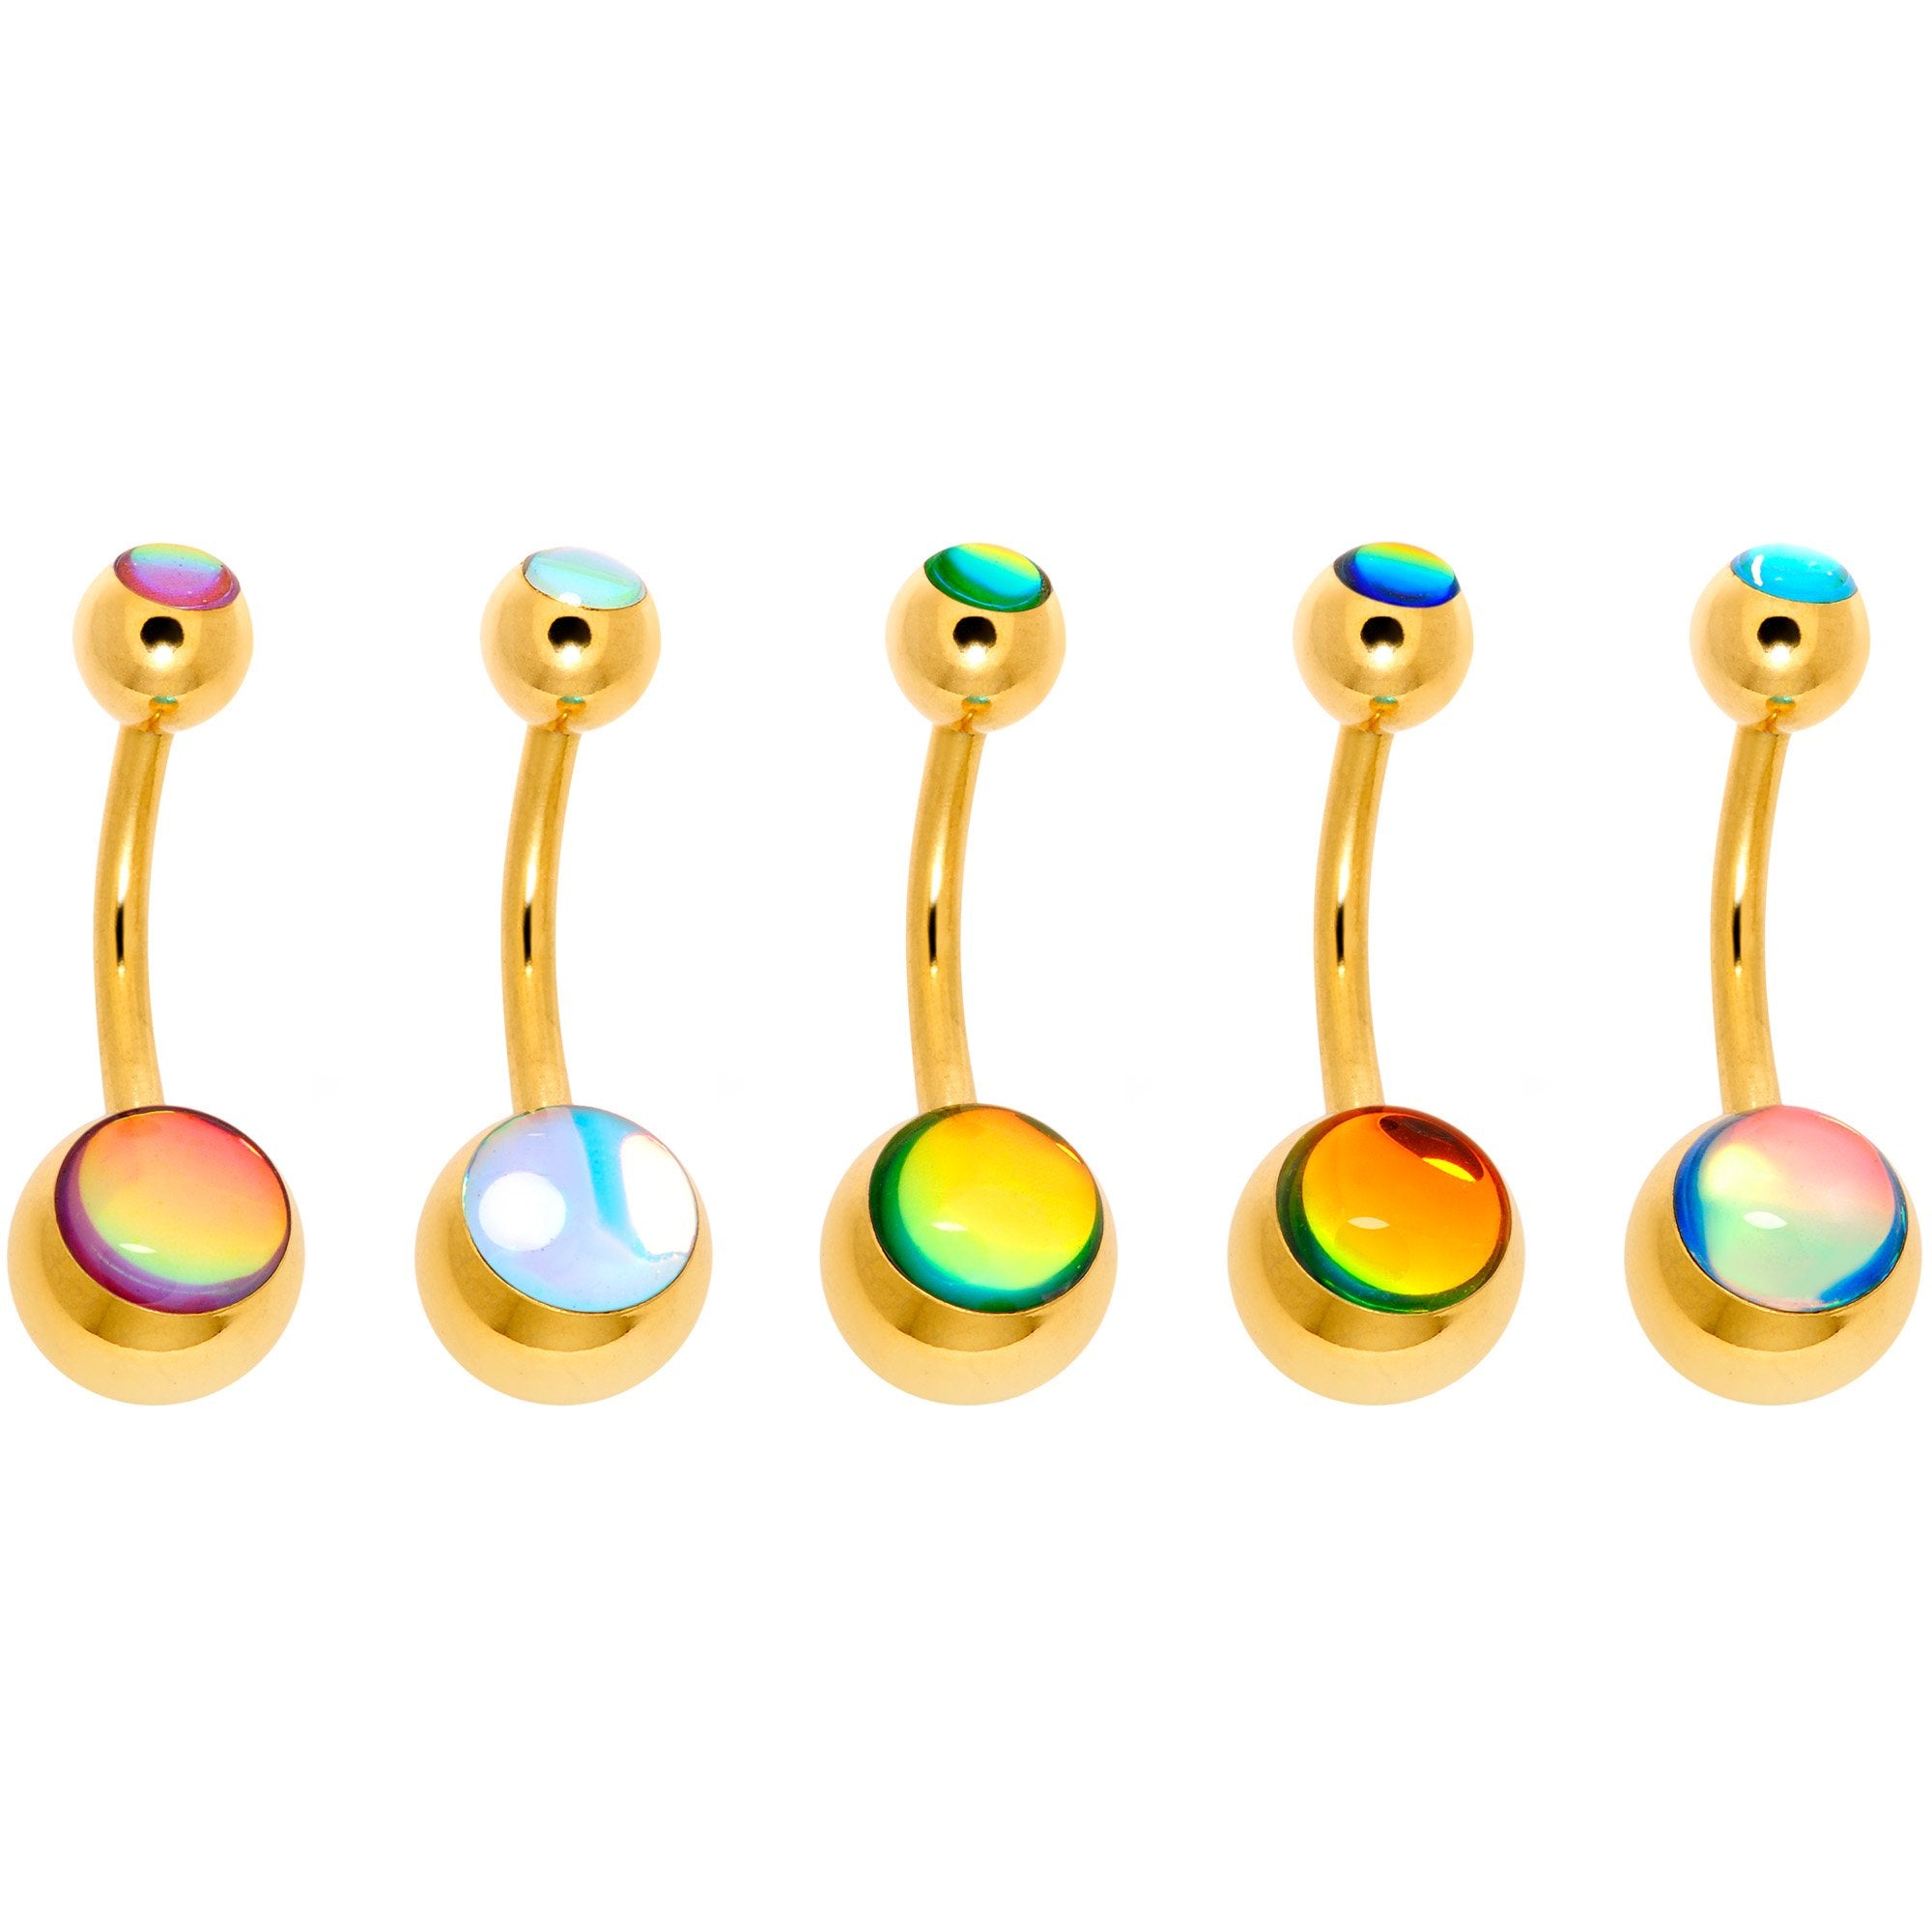 Iridescent Gem Gold Tone Captivating Colors Belly Ring Set Of 5